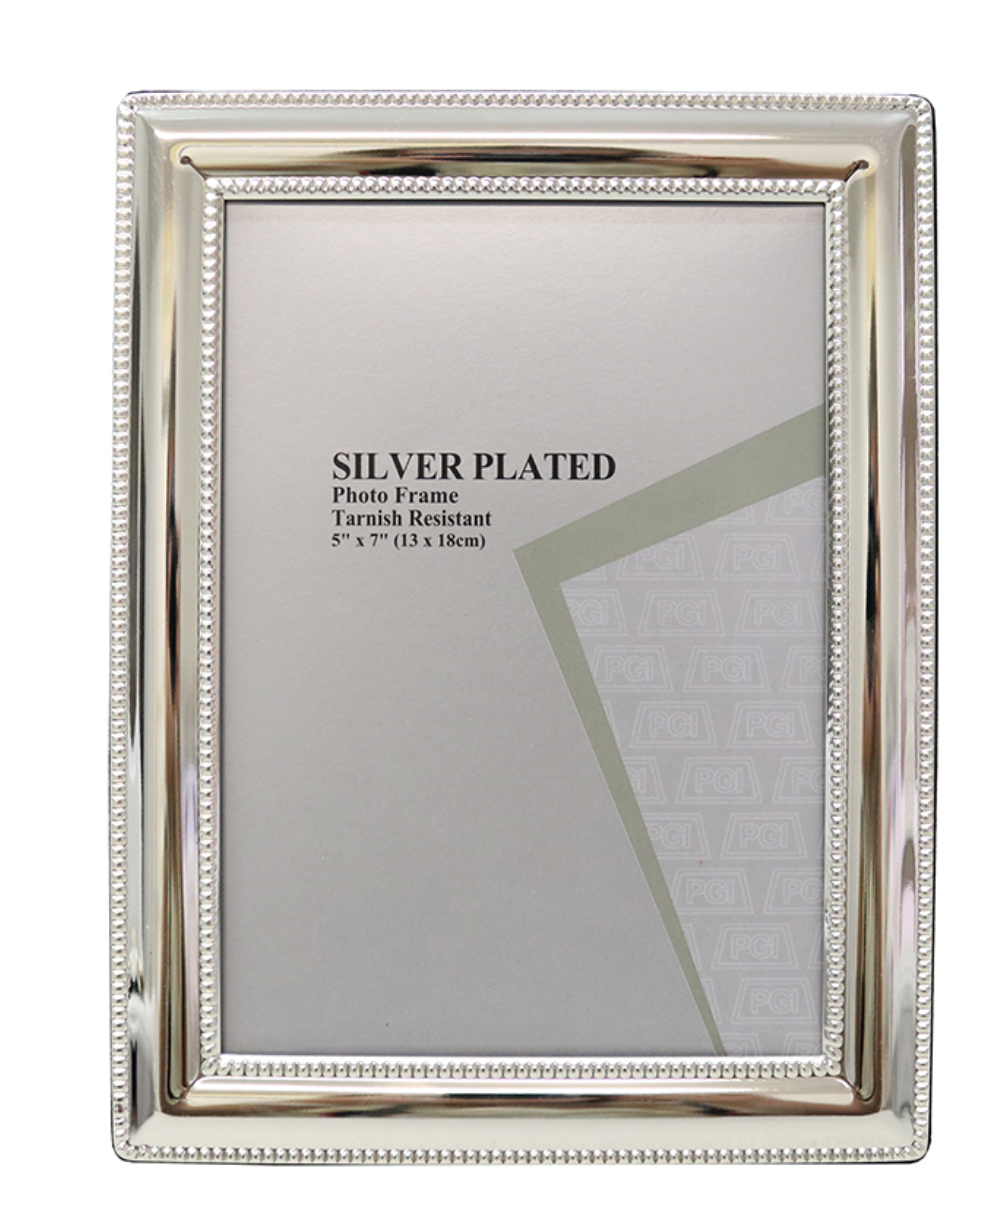 Silver Plated Photo Frame 5x7